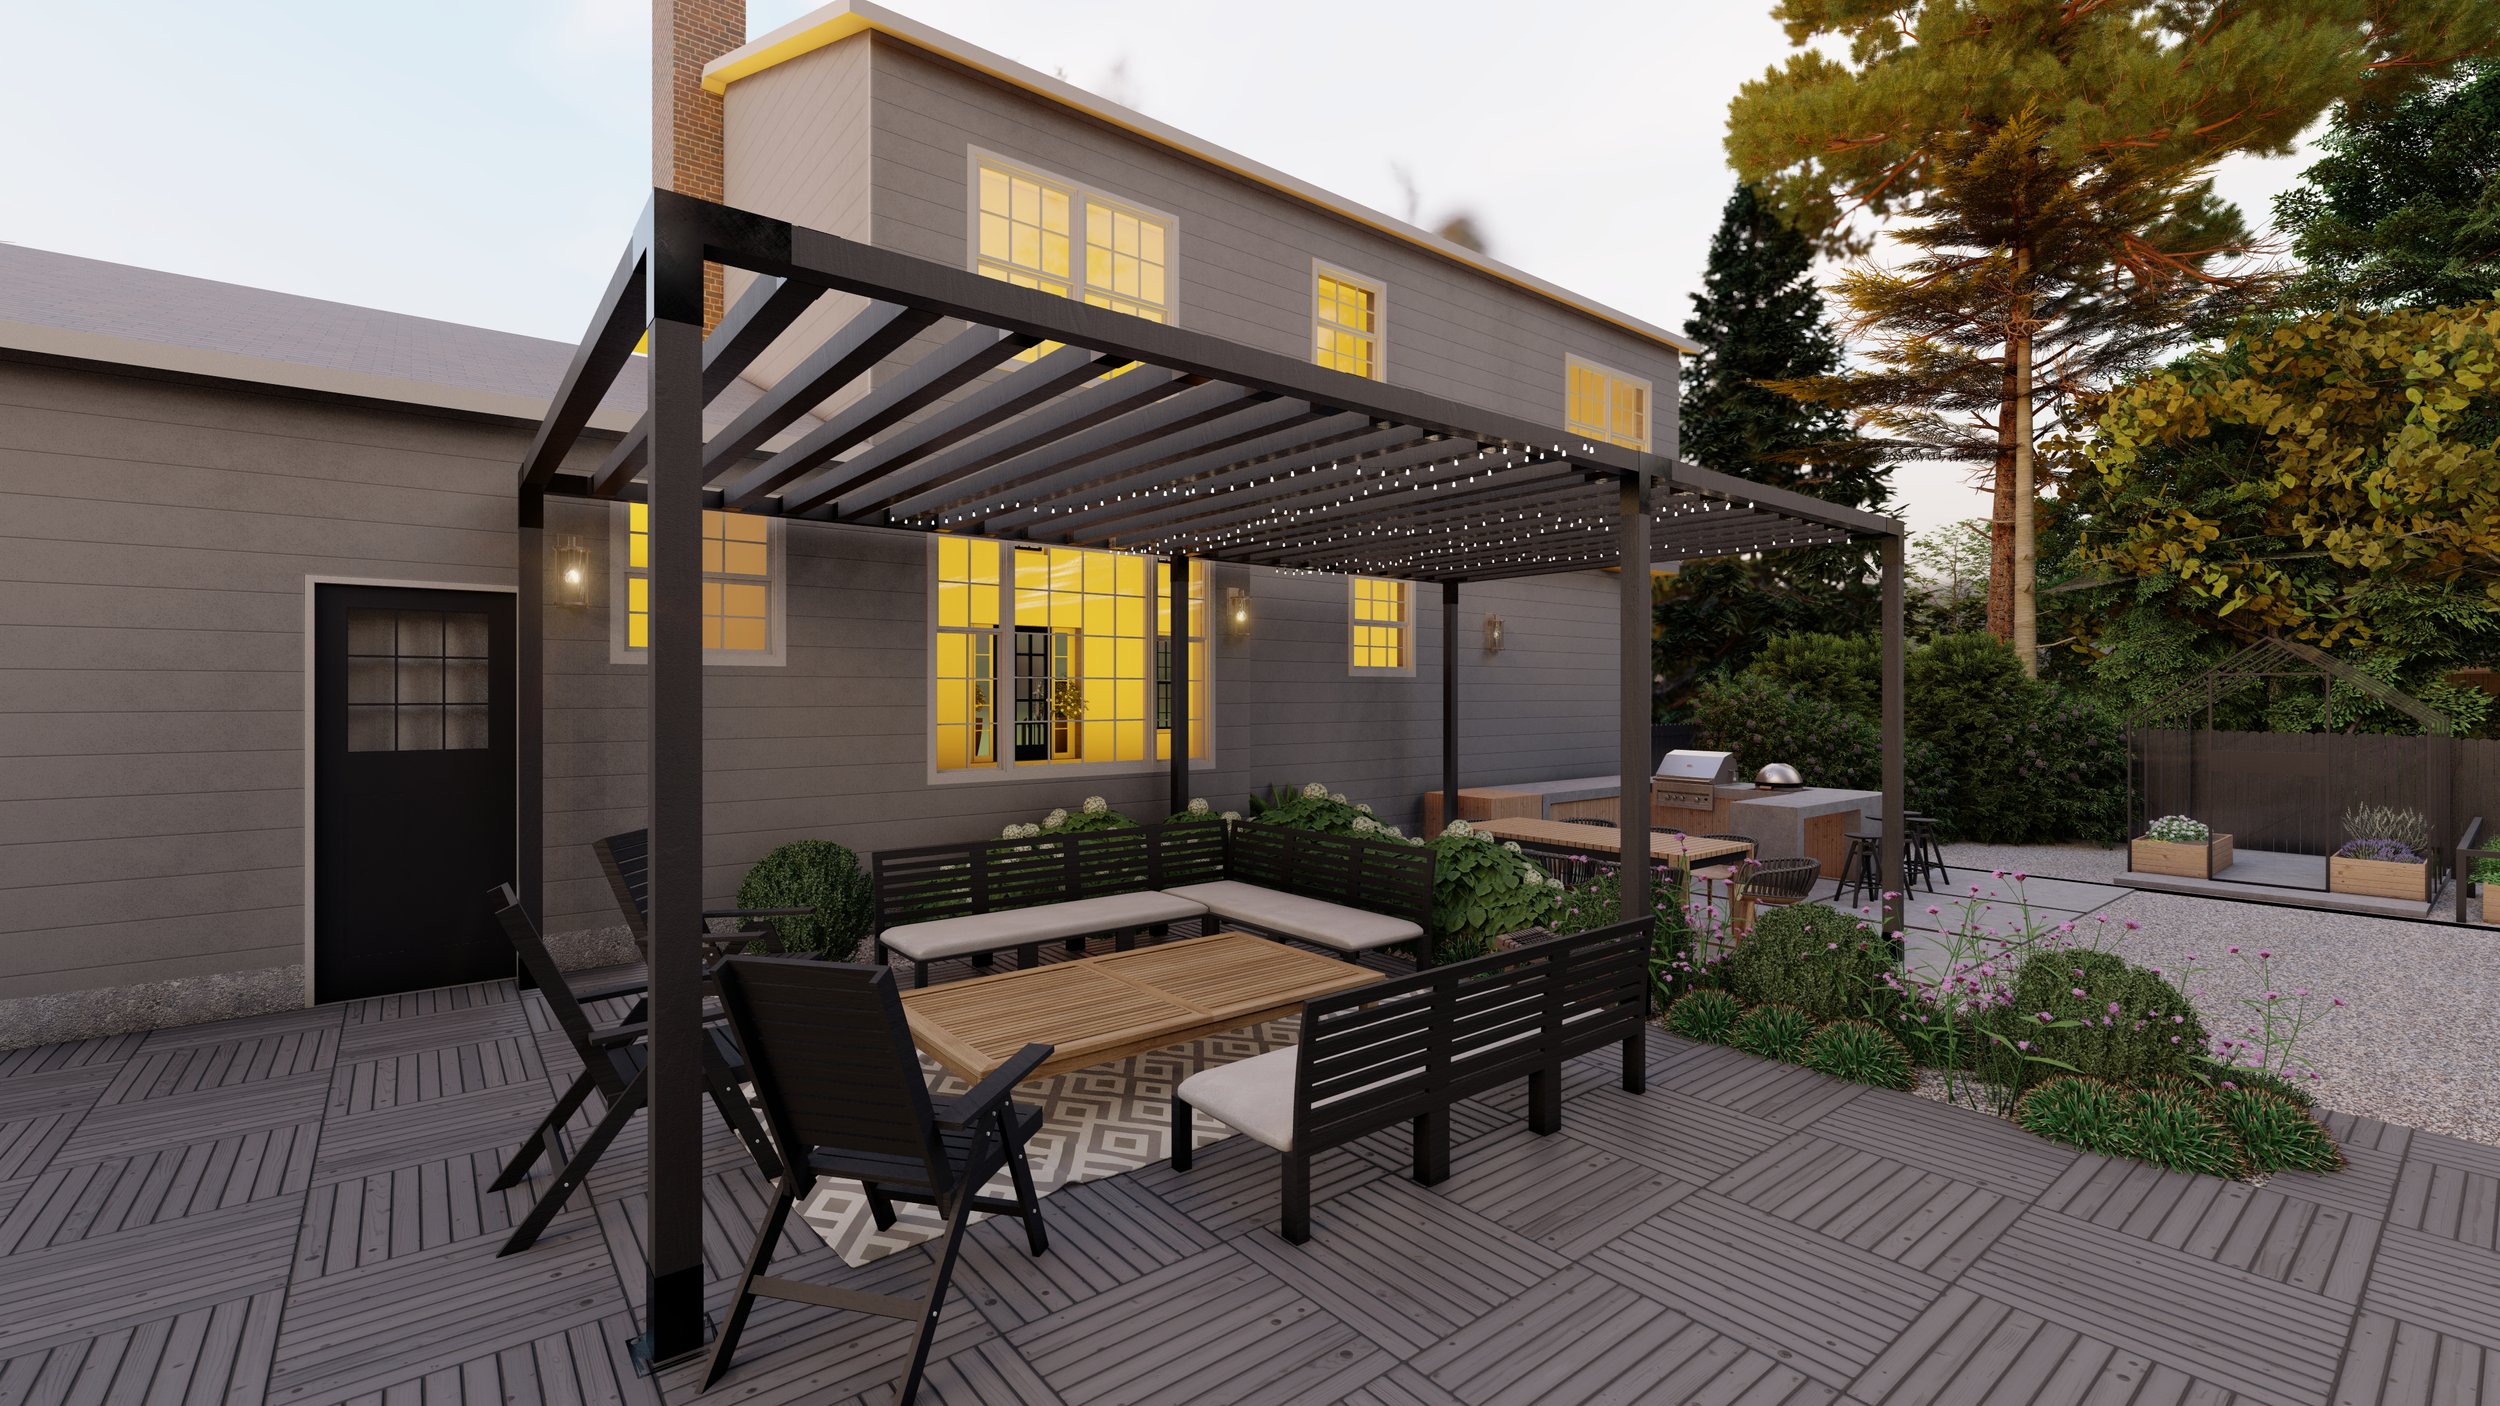 long rectangular black metal pergola against back of home shading a seating area and outdoor kitchen